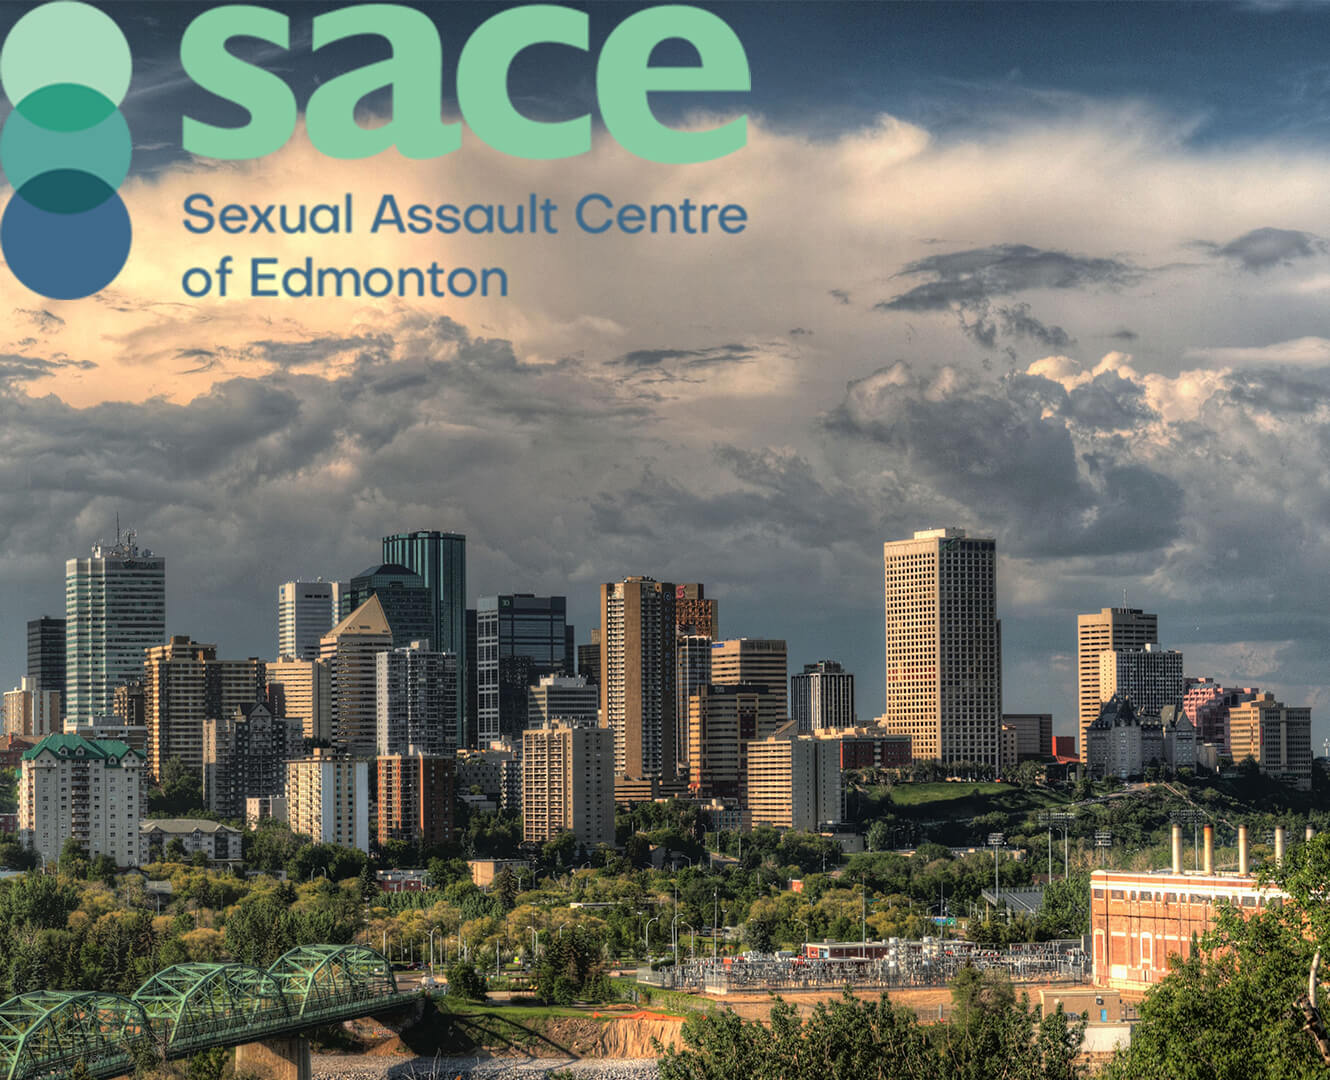 The Sexual Assault Centre of Edmonton aspires for safe campuses this year